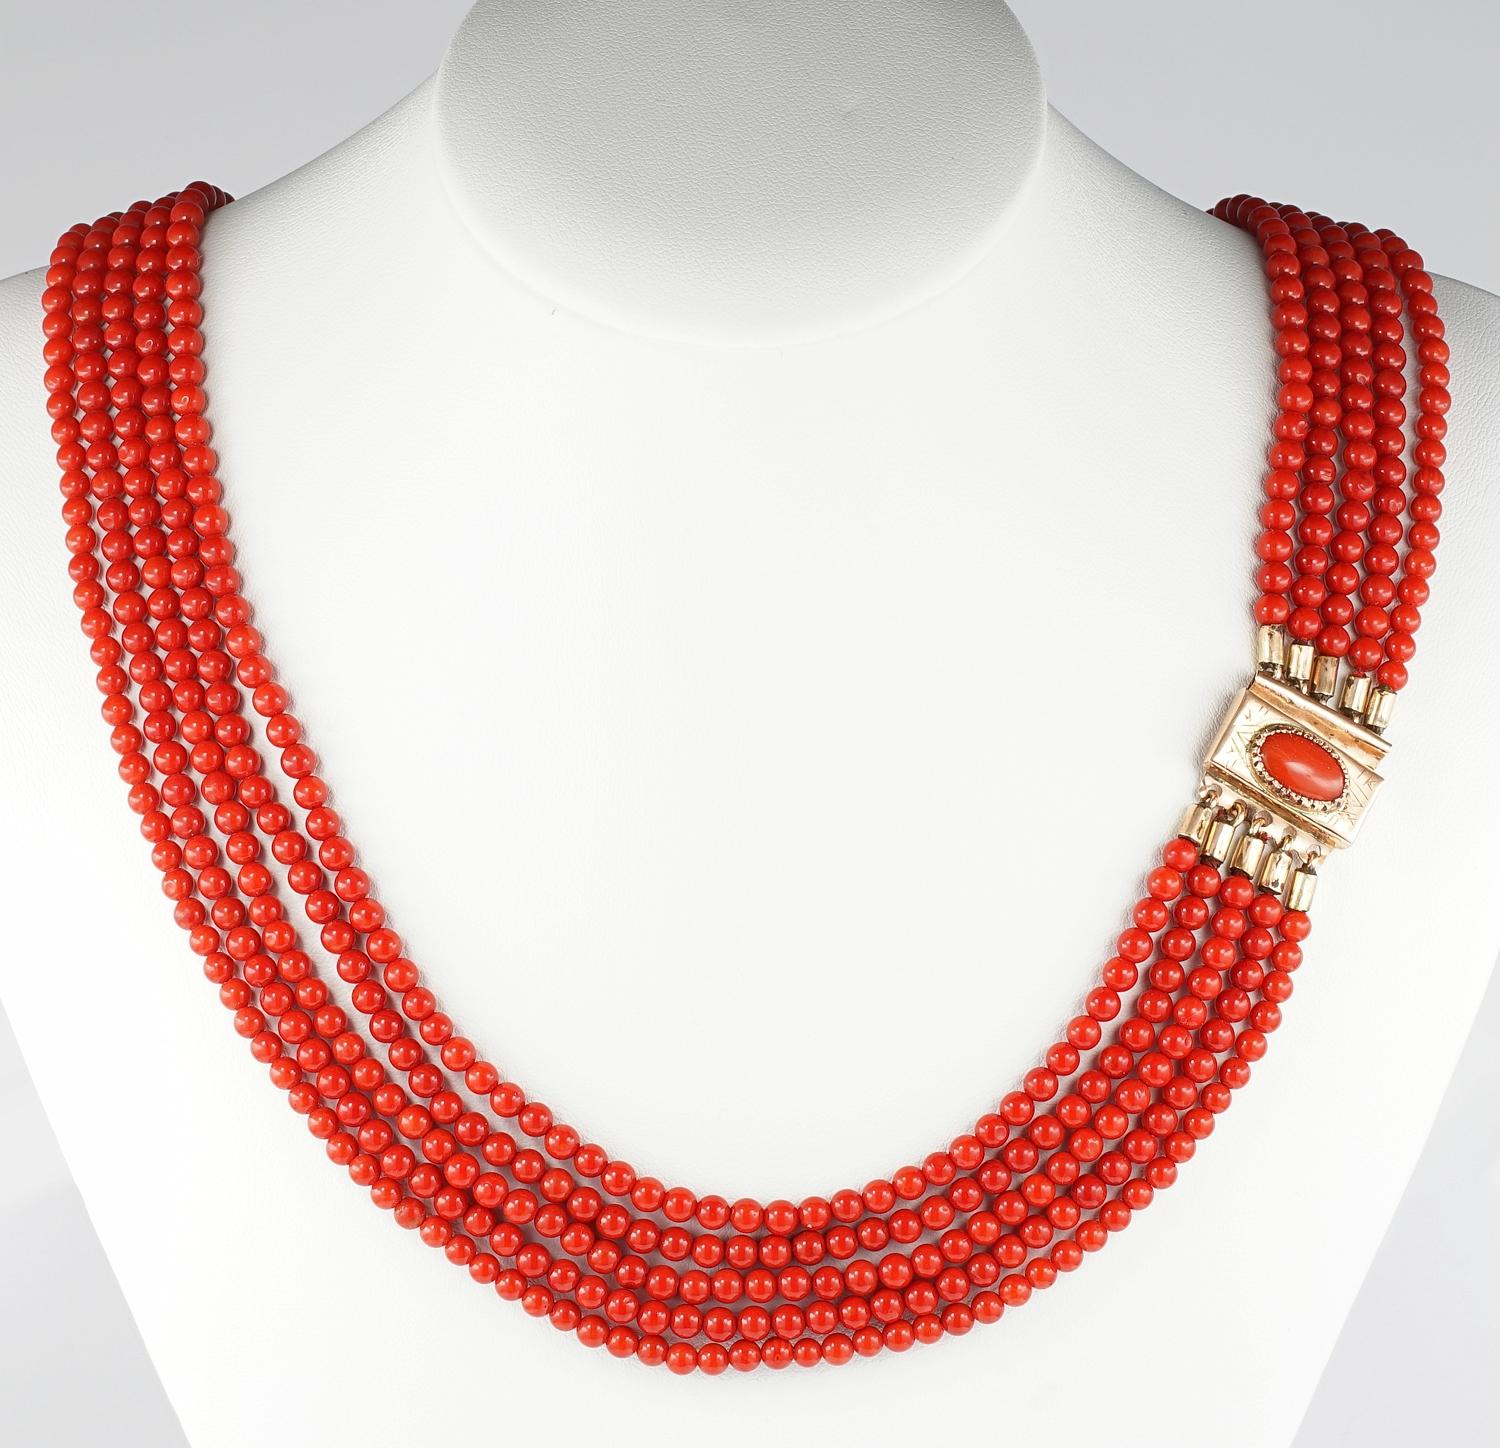 Magnificent five strands of untreated OX Blood intense Red Natural Coral make this genuine Victorian necklace. 1880 ca. Italian origin from Sardinia.
Each bead is 4 mm. in diameter – all even and selected hand turned – stunning colour!
Completed by